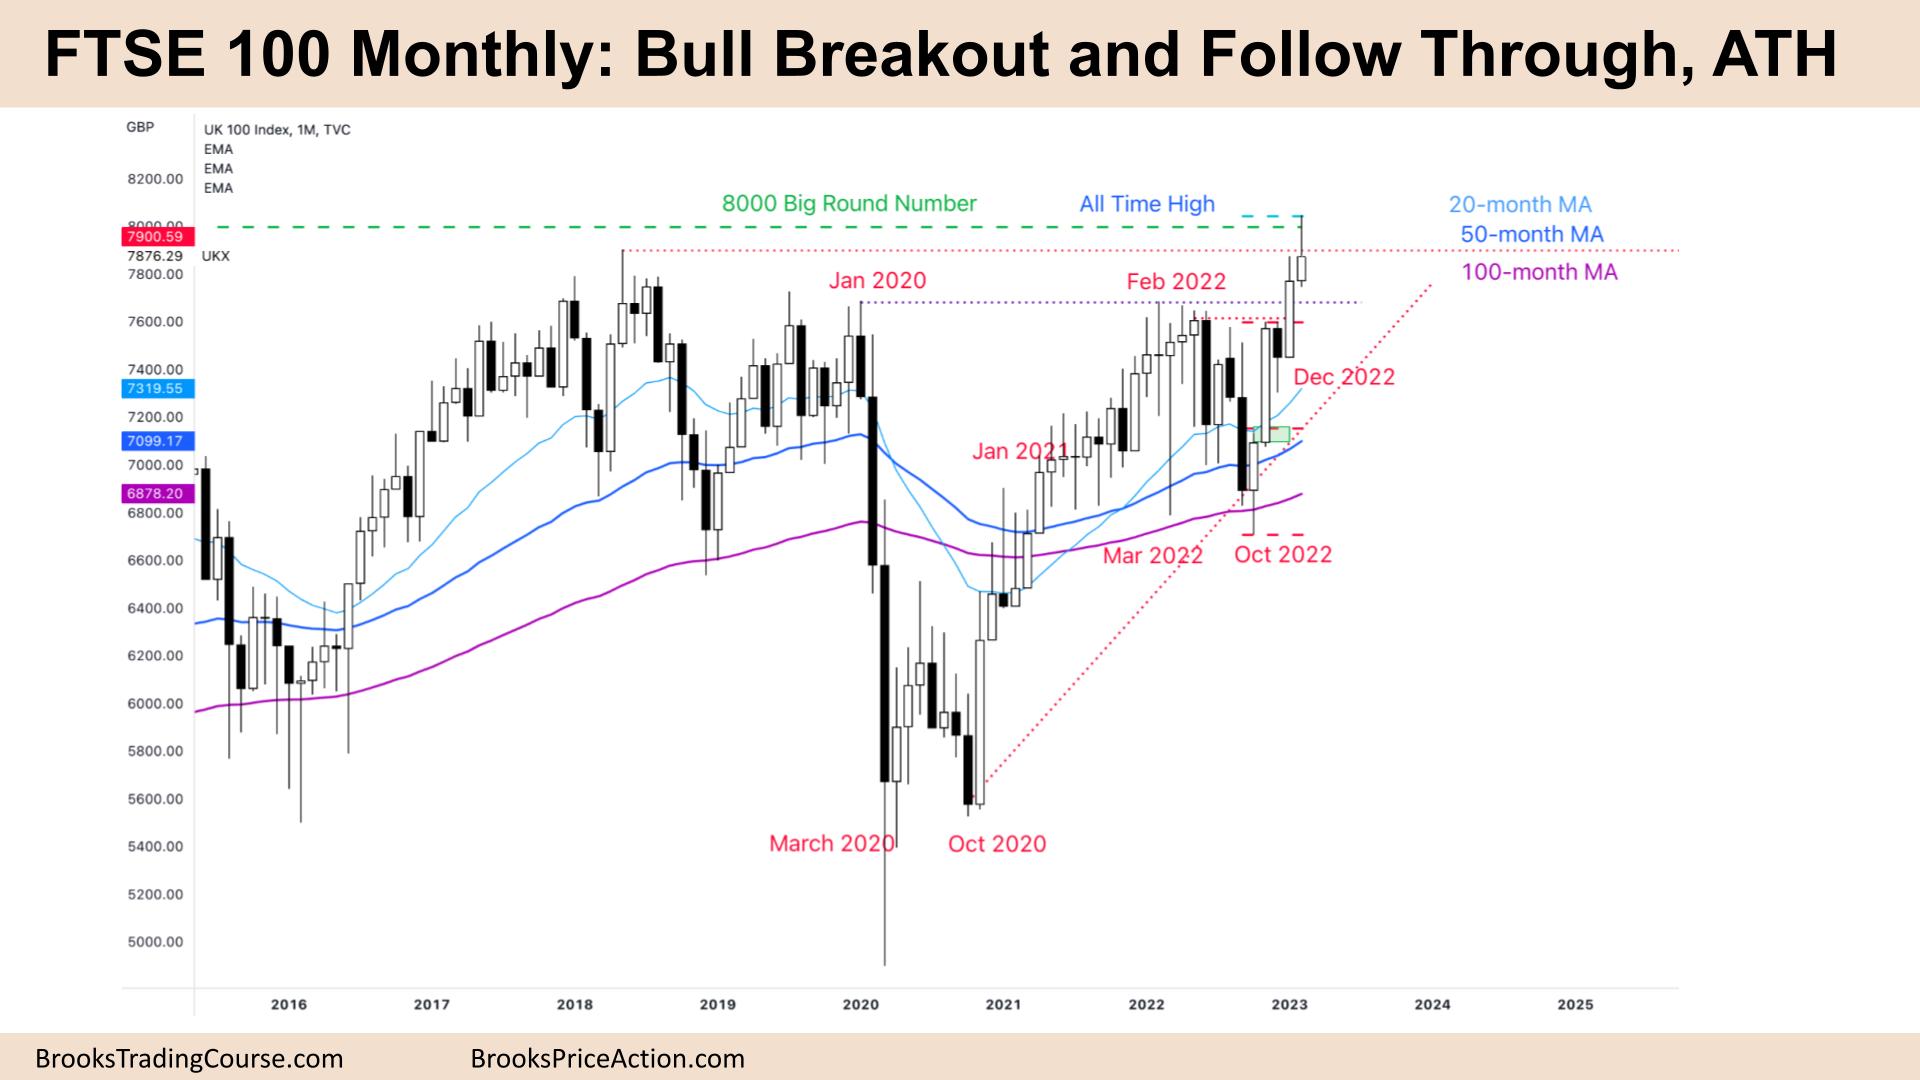 FTSE 100 Bull Breakout and Follow Through, at All-time High